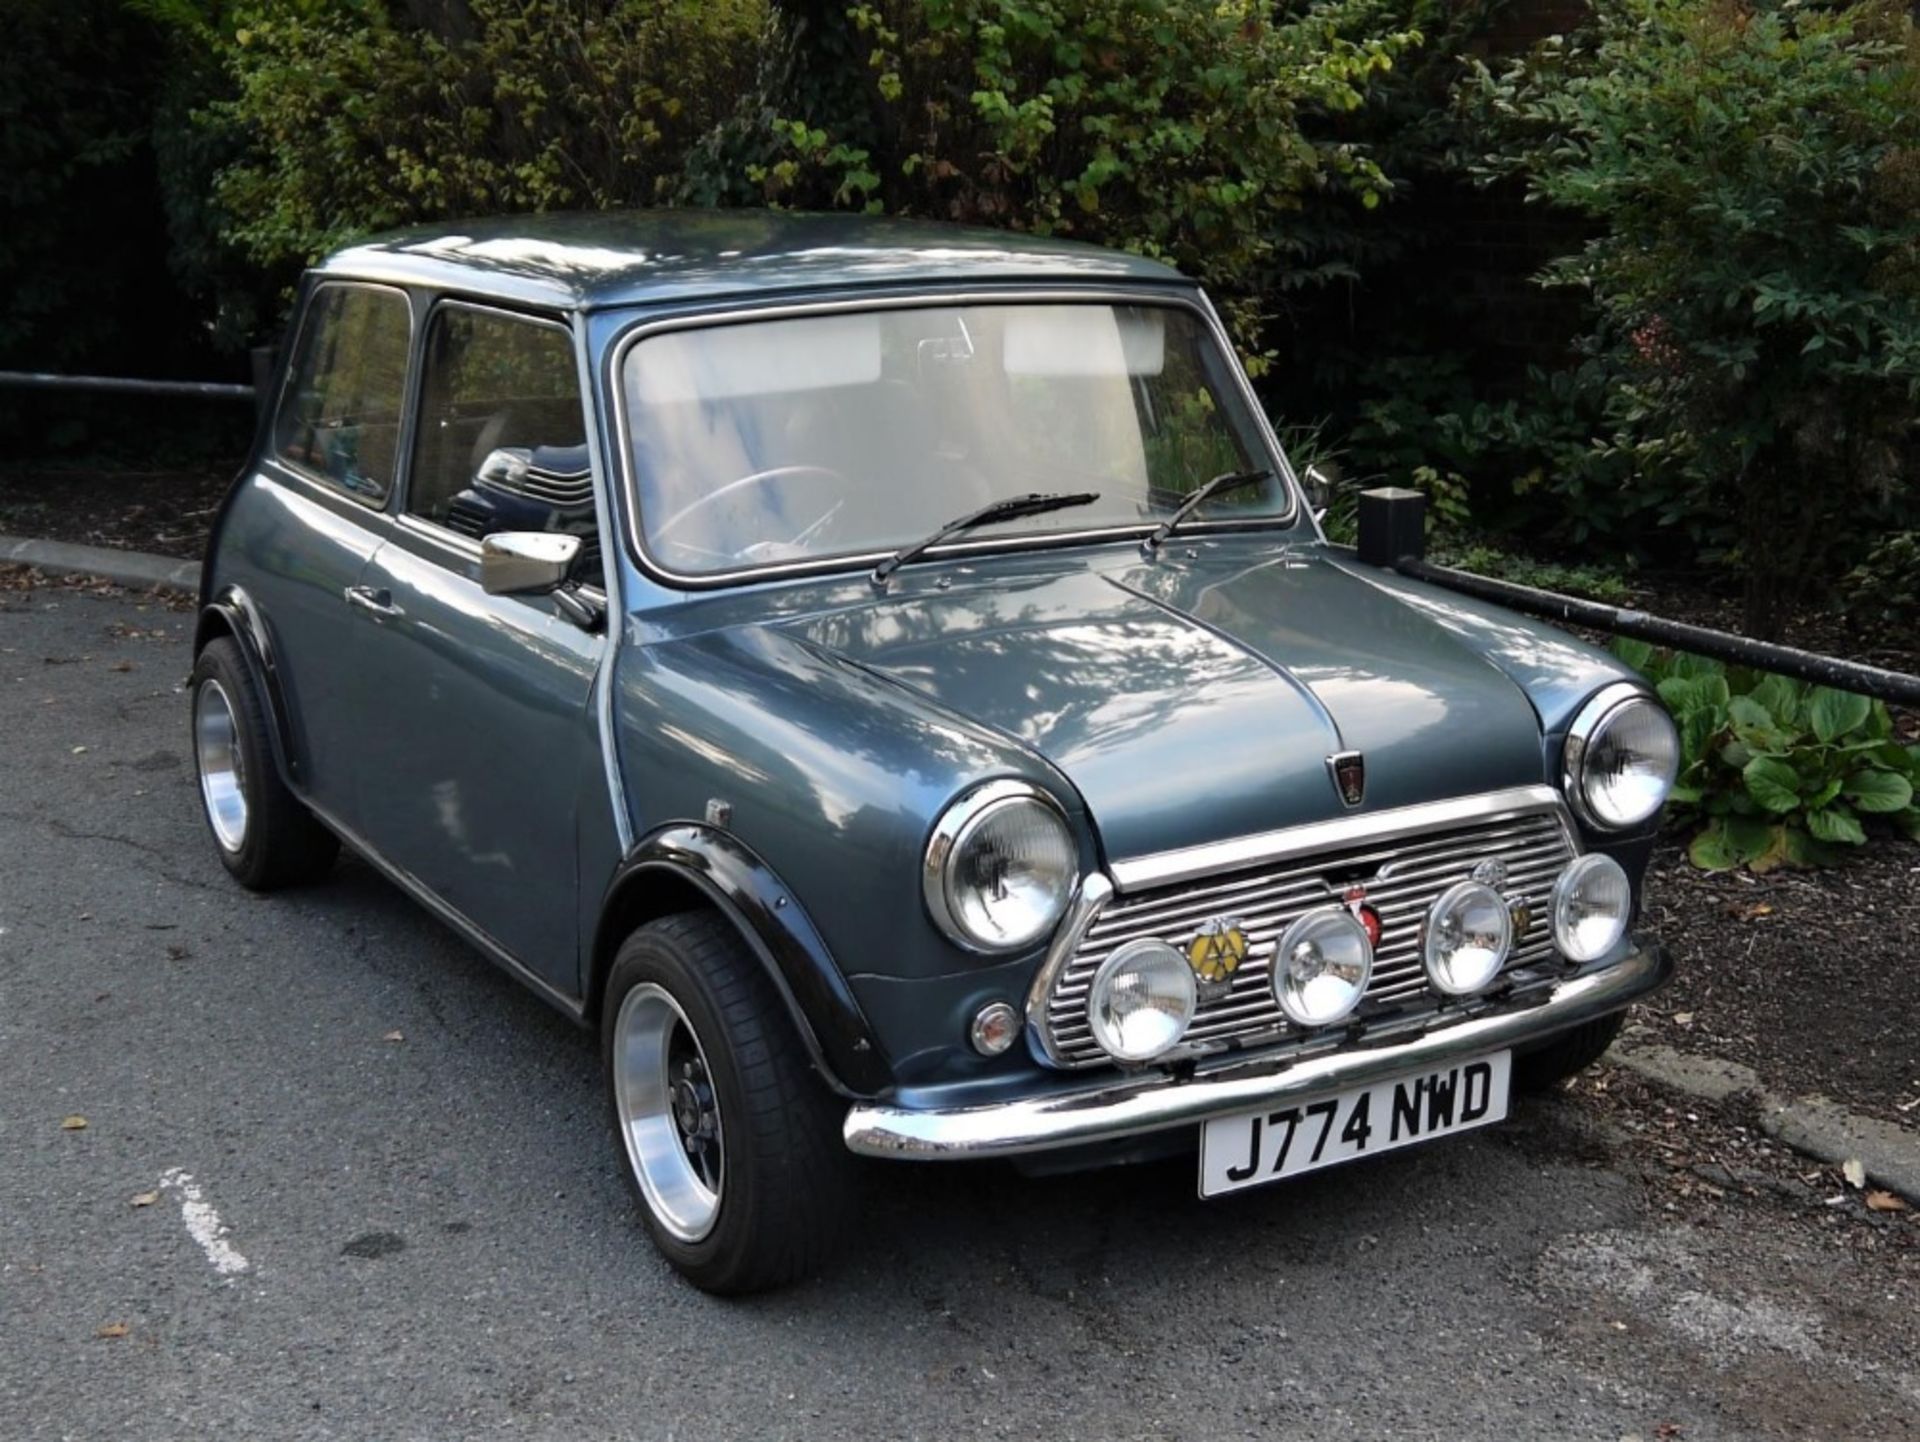 1991 ROVER MINI NEON Registration Number: J774 NWD Recorded Mileage: 58,000 miles Chassis Number: - Image 13 of 24